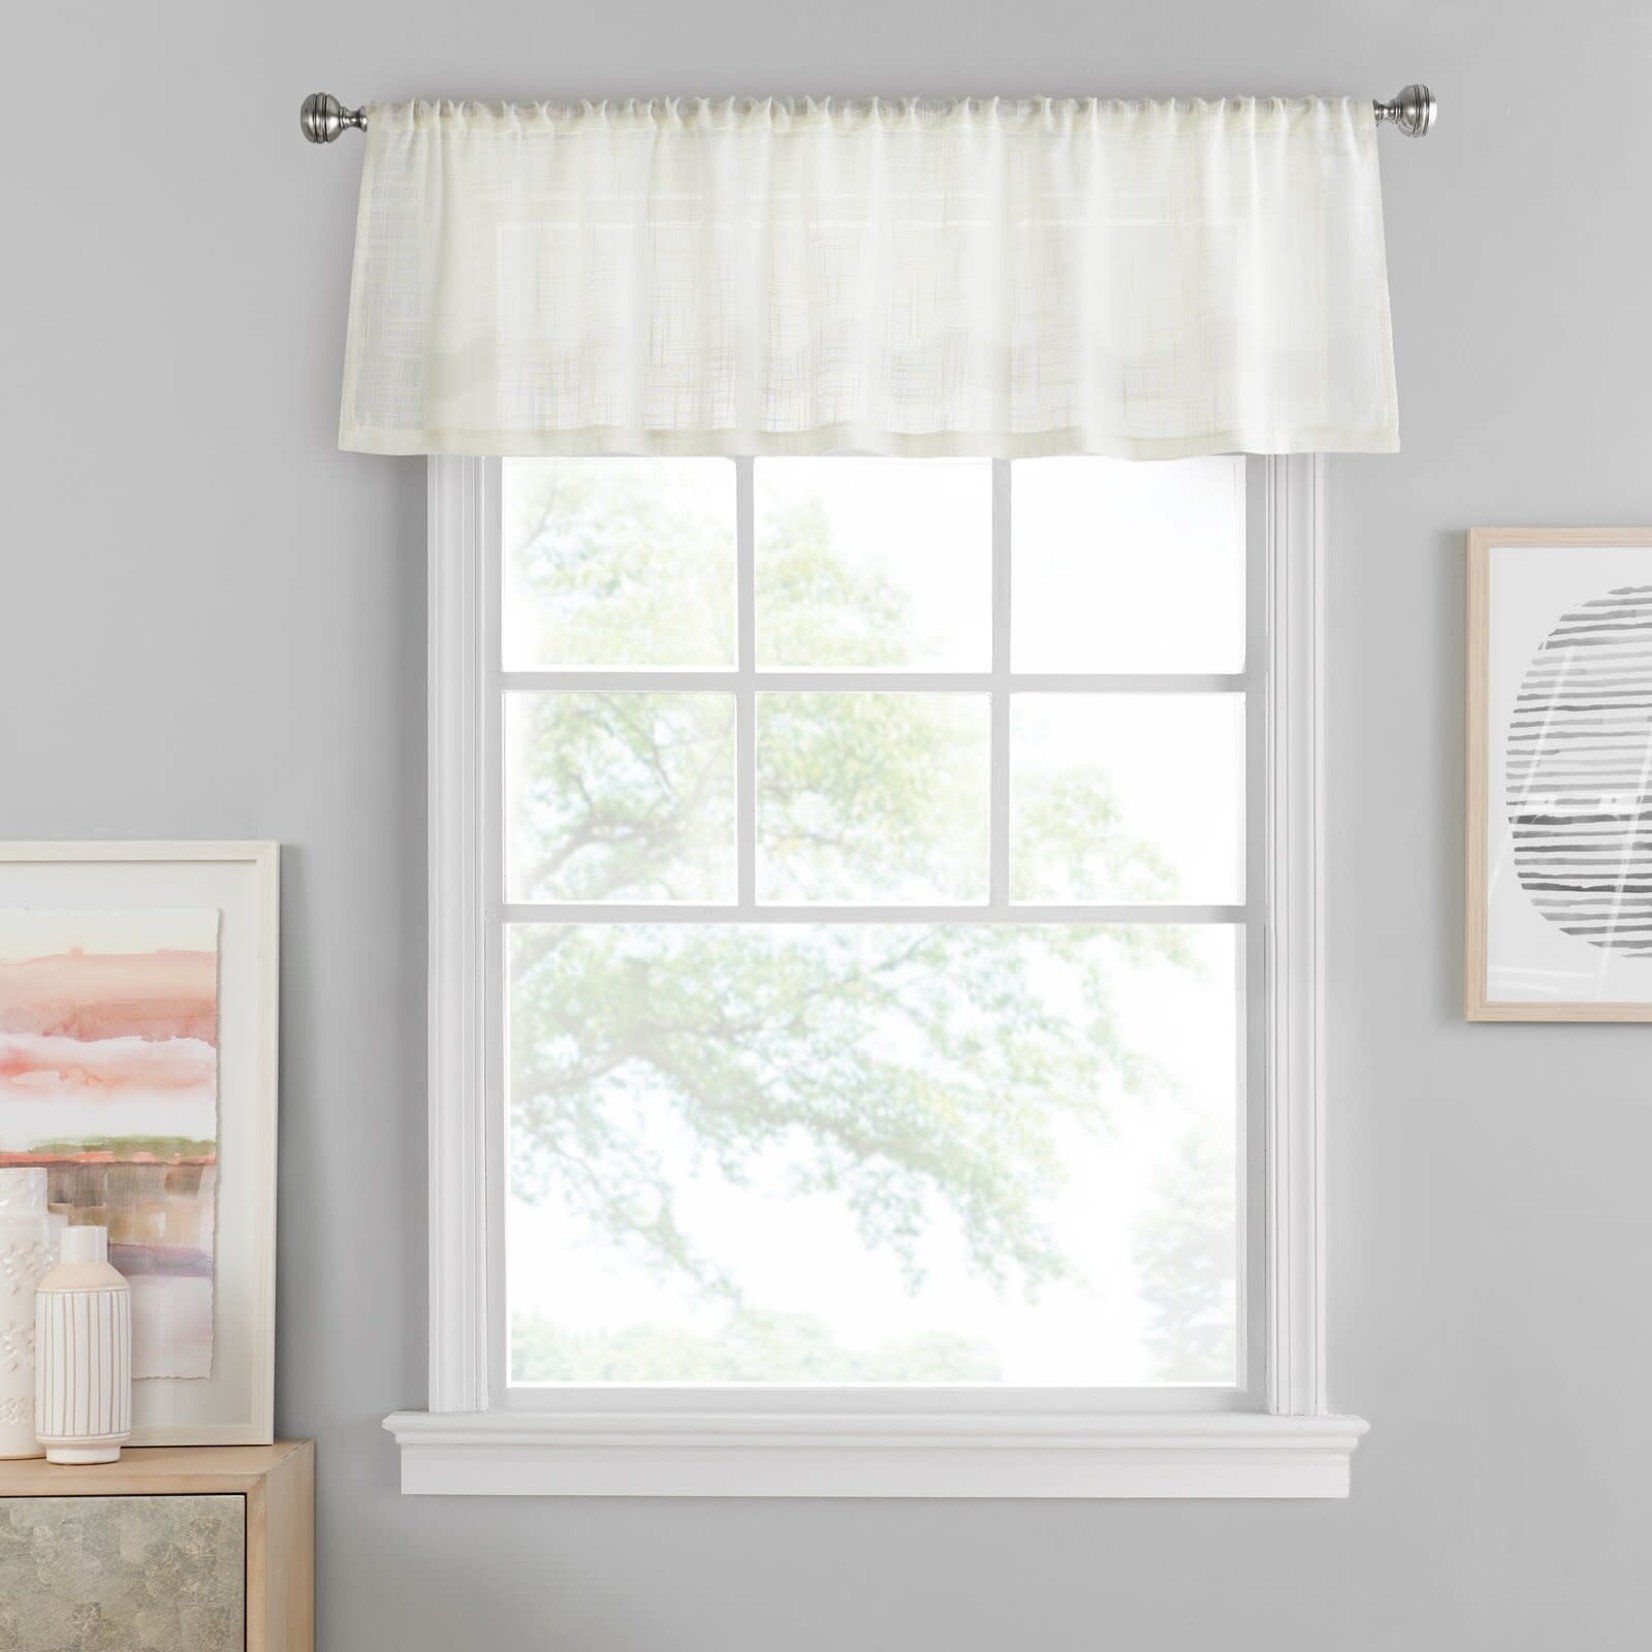 *14" x 52" Wegate Solid Color Ivory Tailored Window Valance